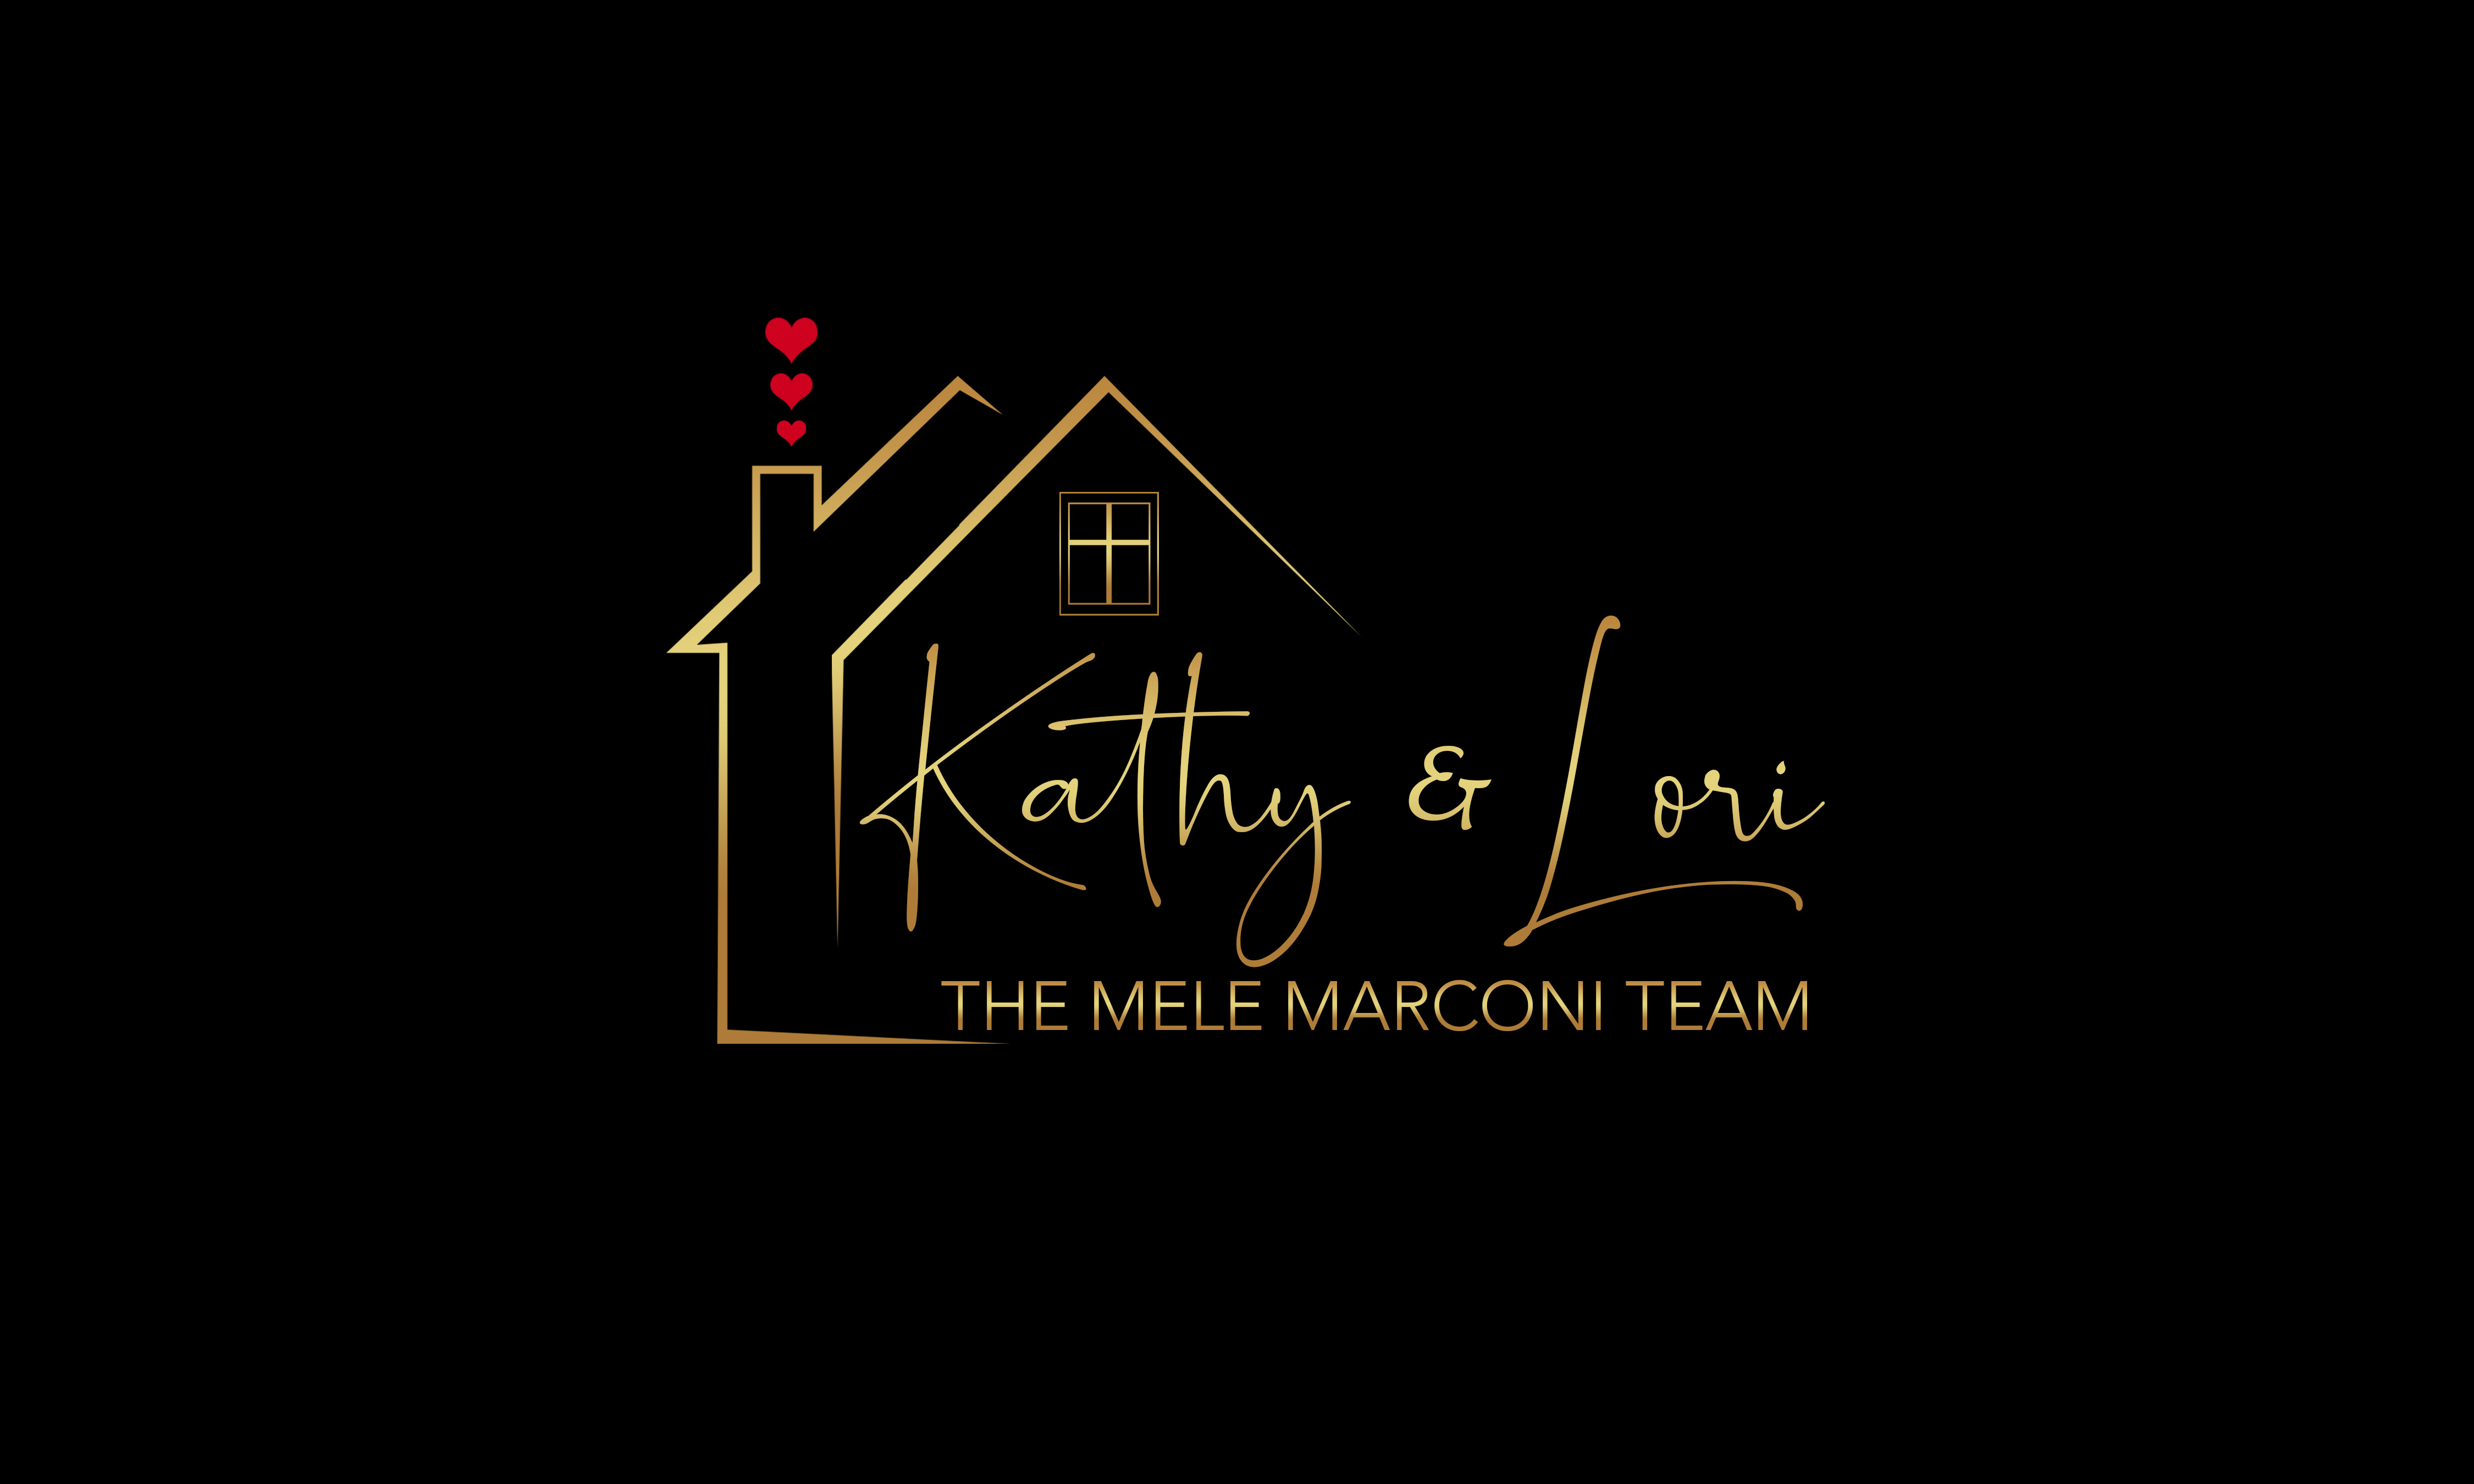 The Mele Marconi Team, with Keller Williams Realty